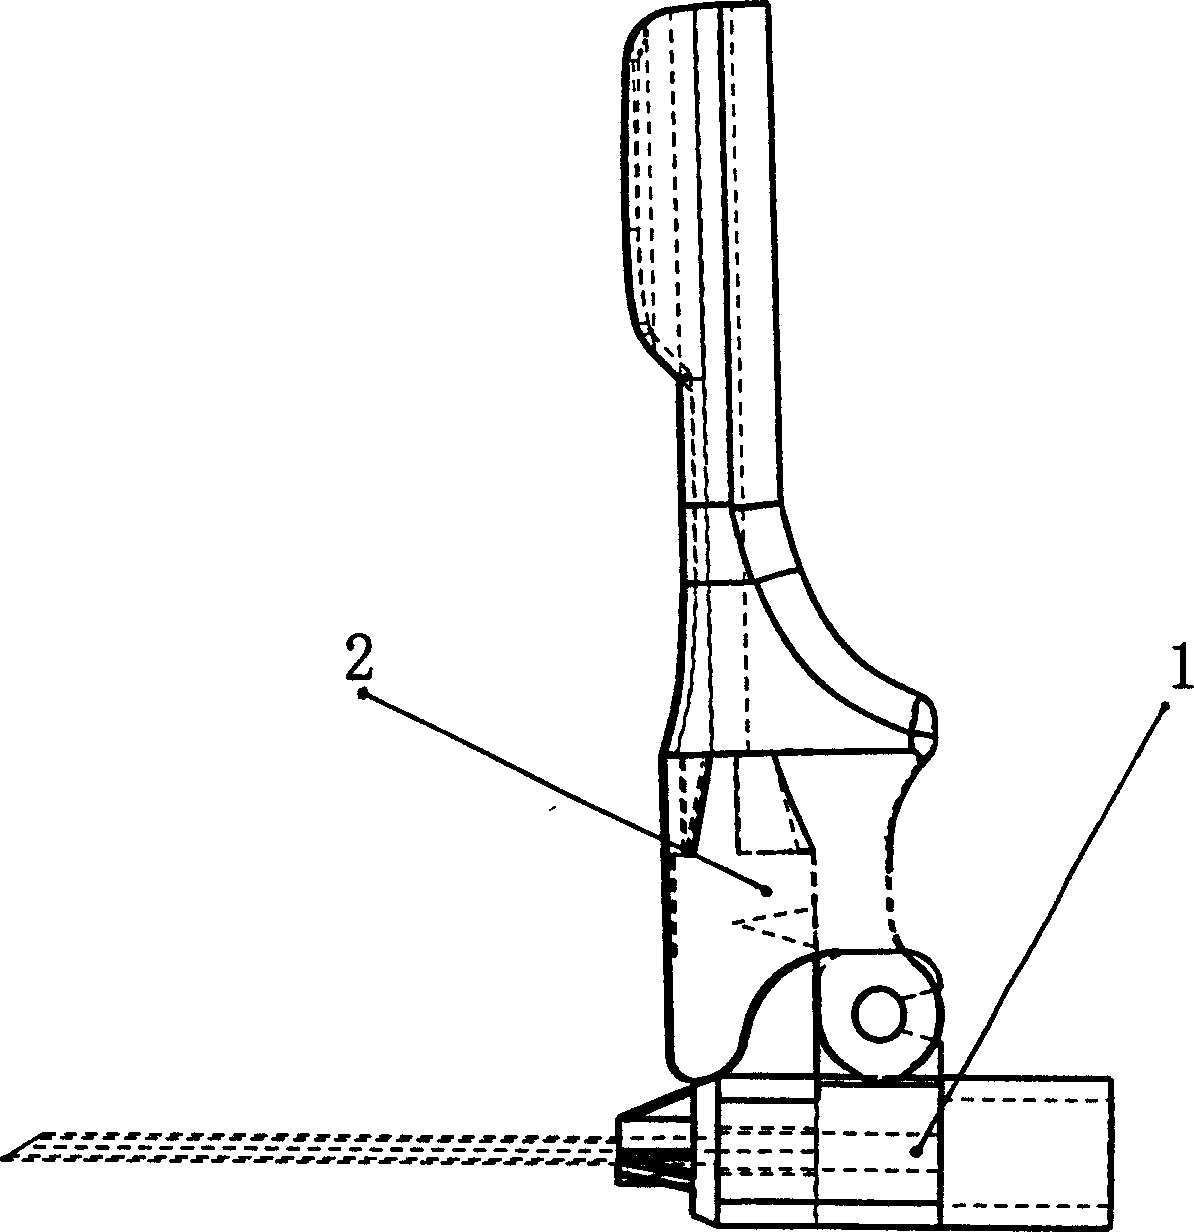 Safeguard protection setting for expendable needle in use for medical treatment